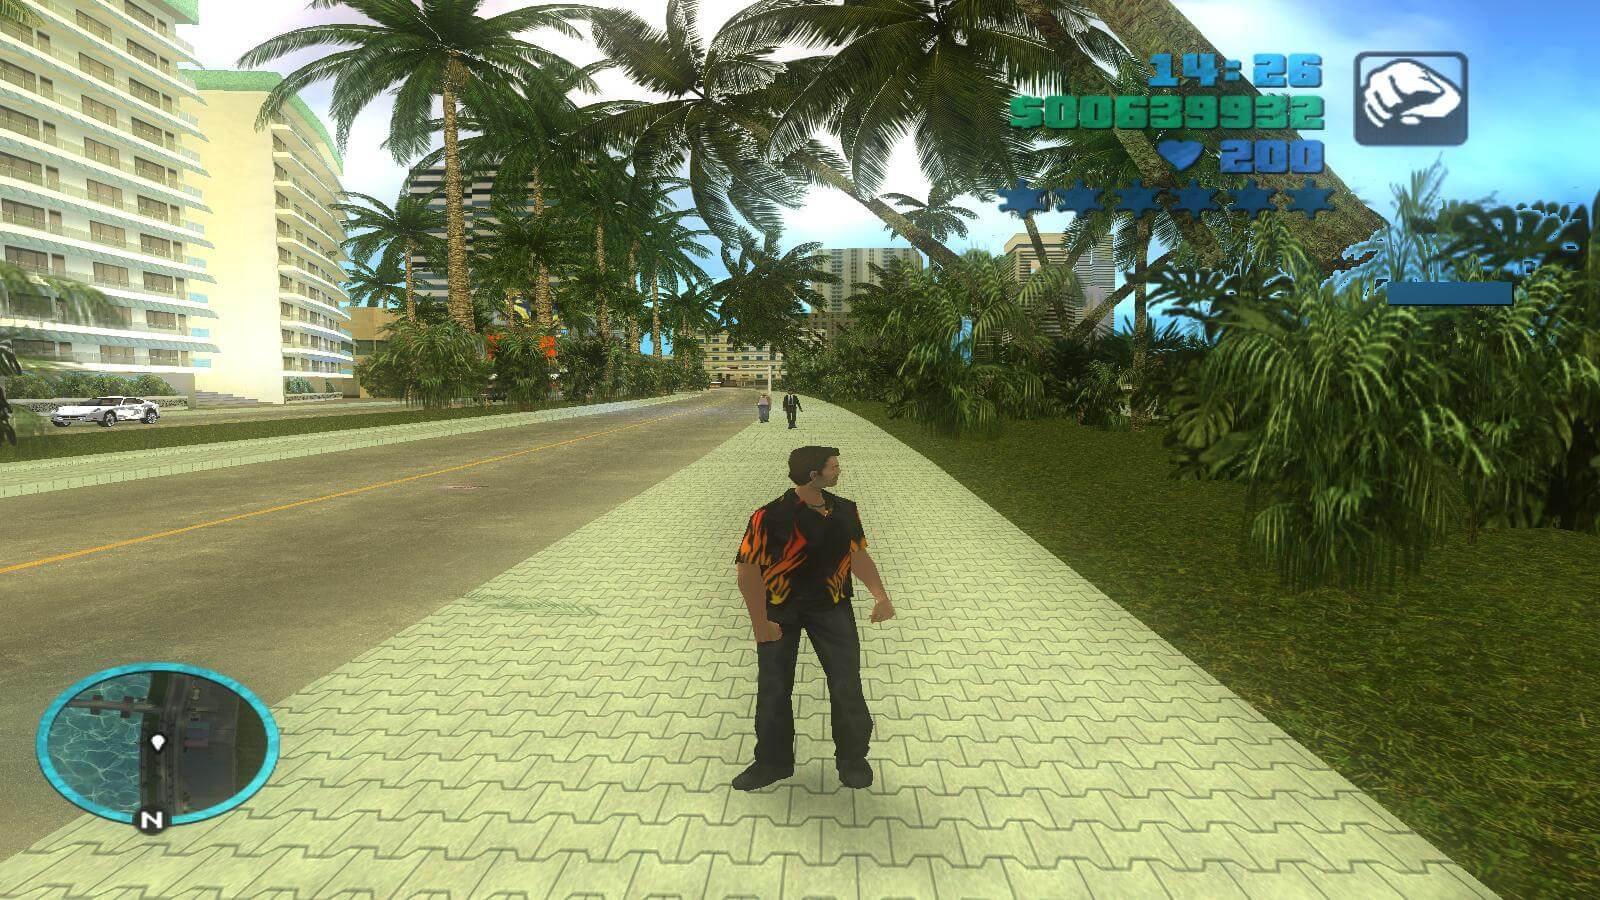 GTA Vice City Modern mod version 1.2 adds new textures and